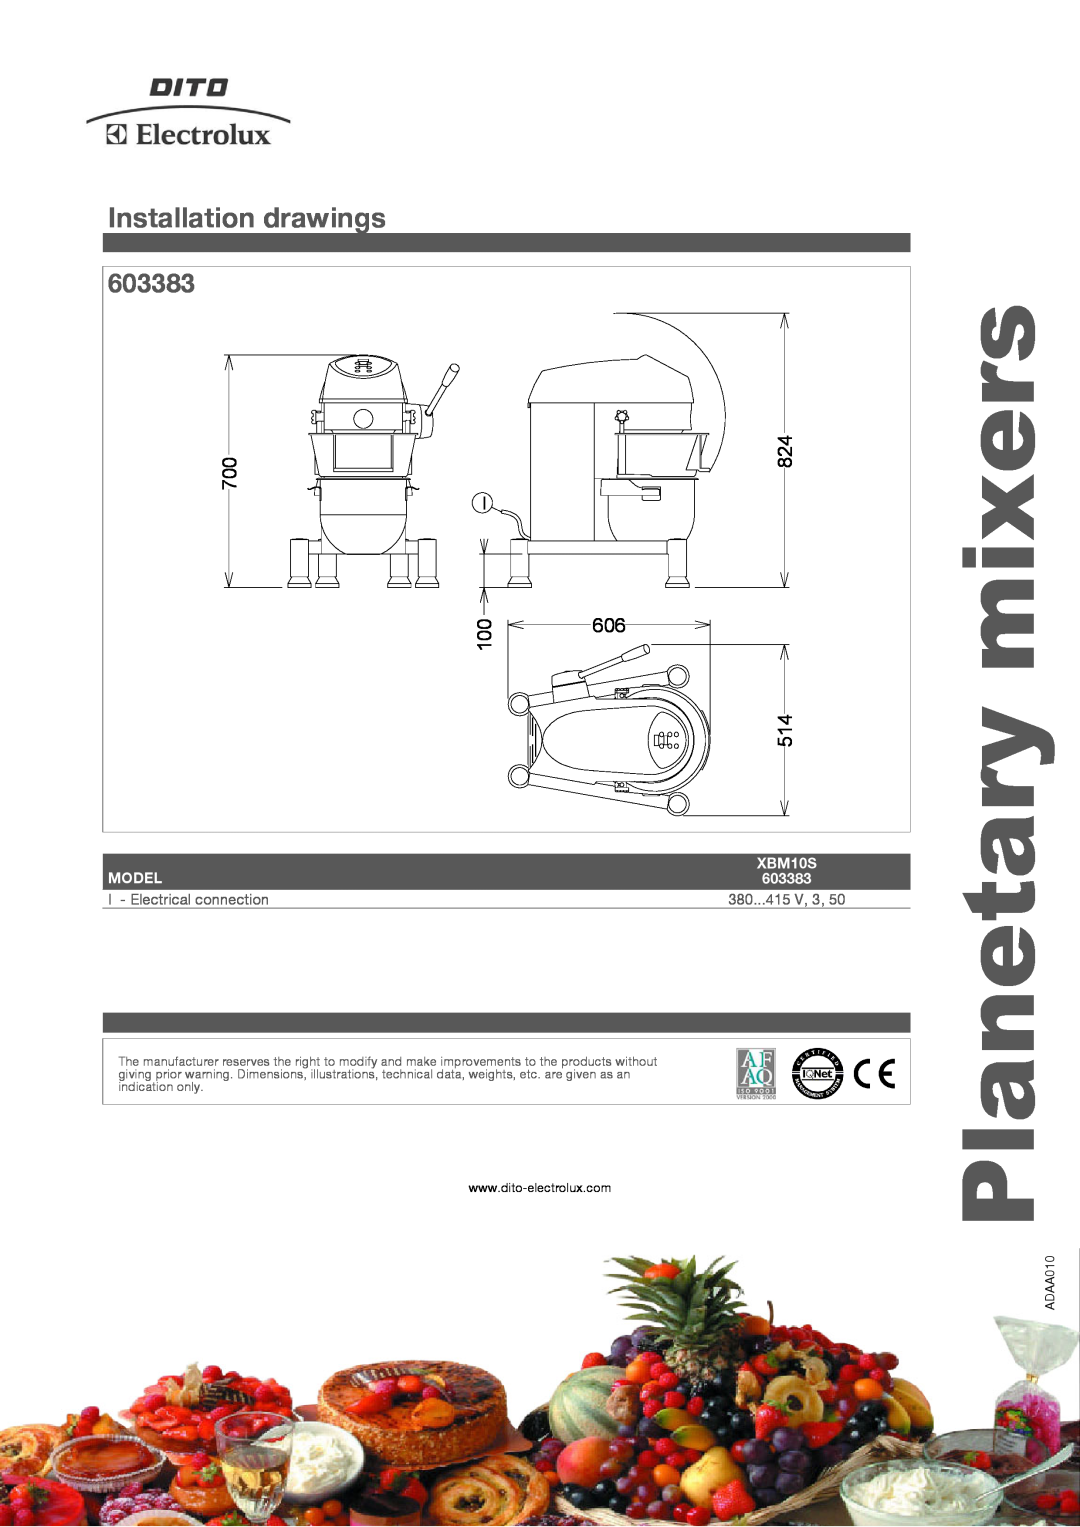 Electrolux XBM10S Installation drawings, 603383, mixers, Planetary, 824 514, Model, I - Electrical connection, ADAA010 